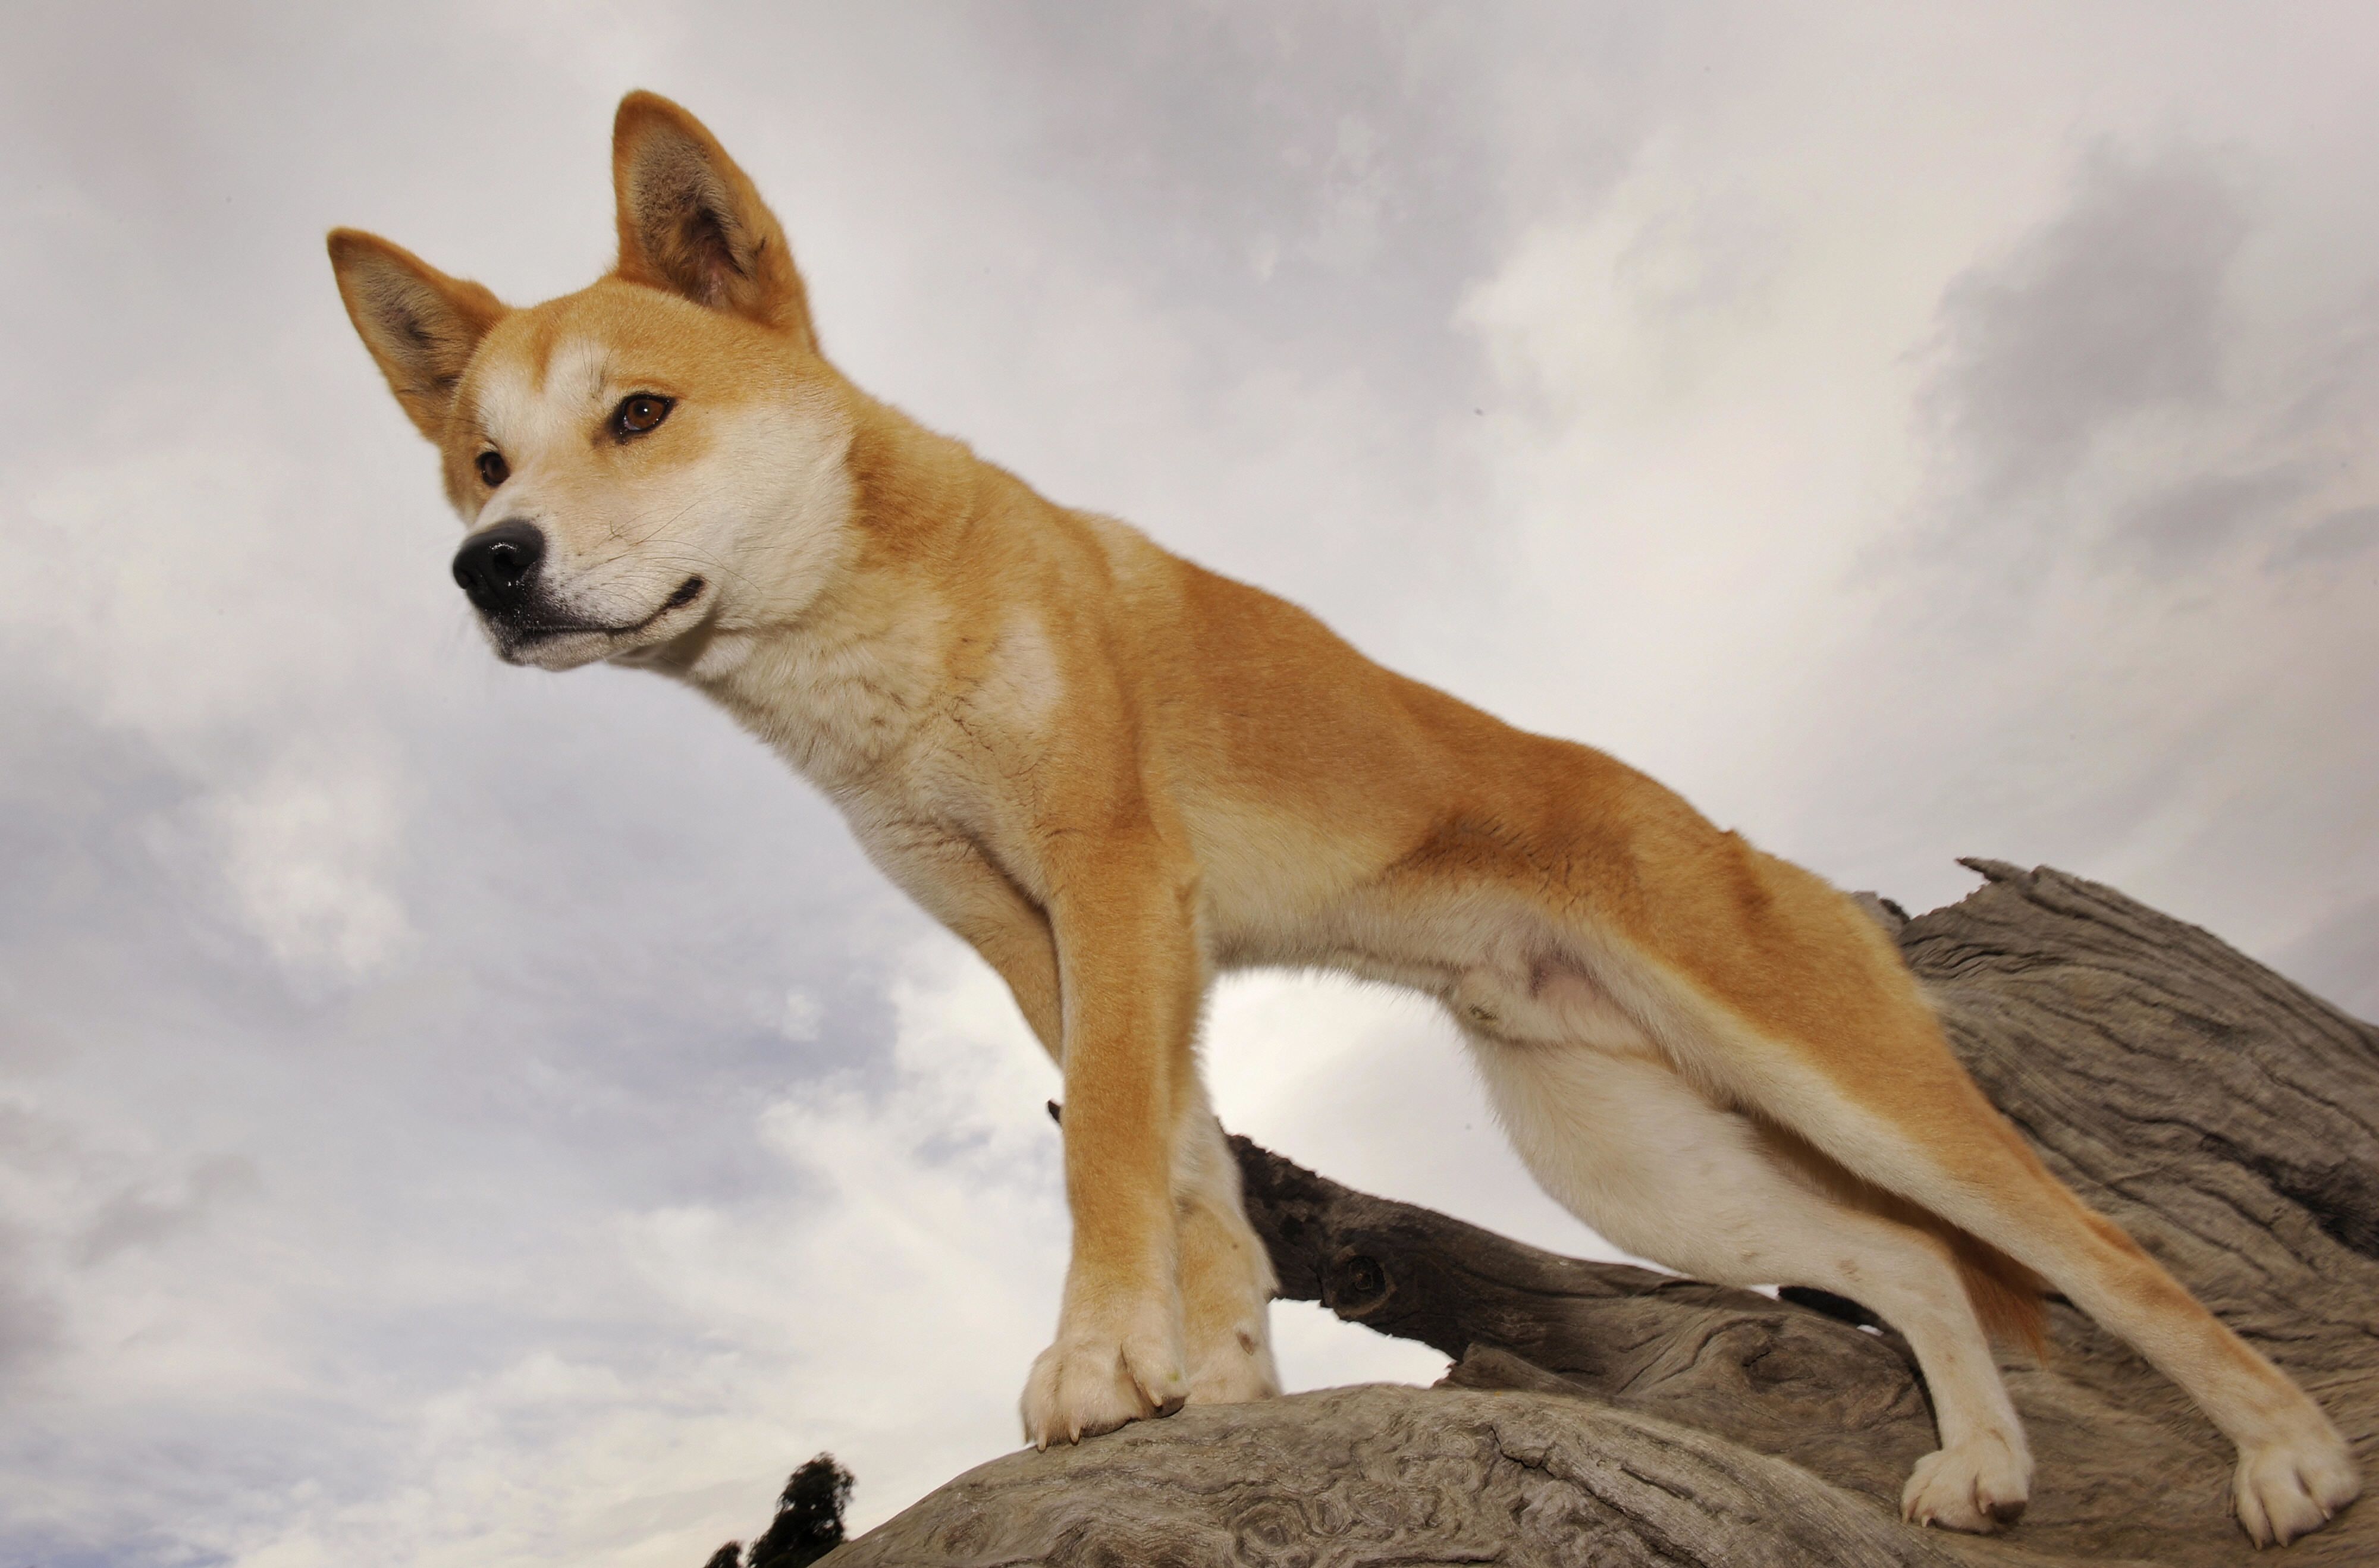 Dingo DNA study shows most of the Victorian dingoes are pure bred